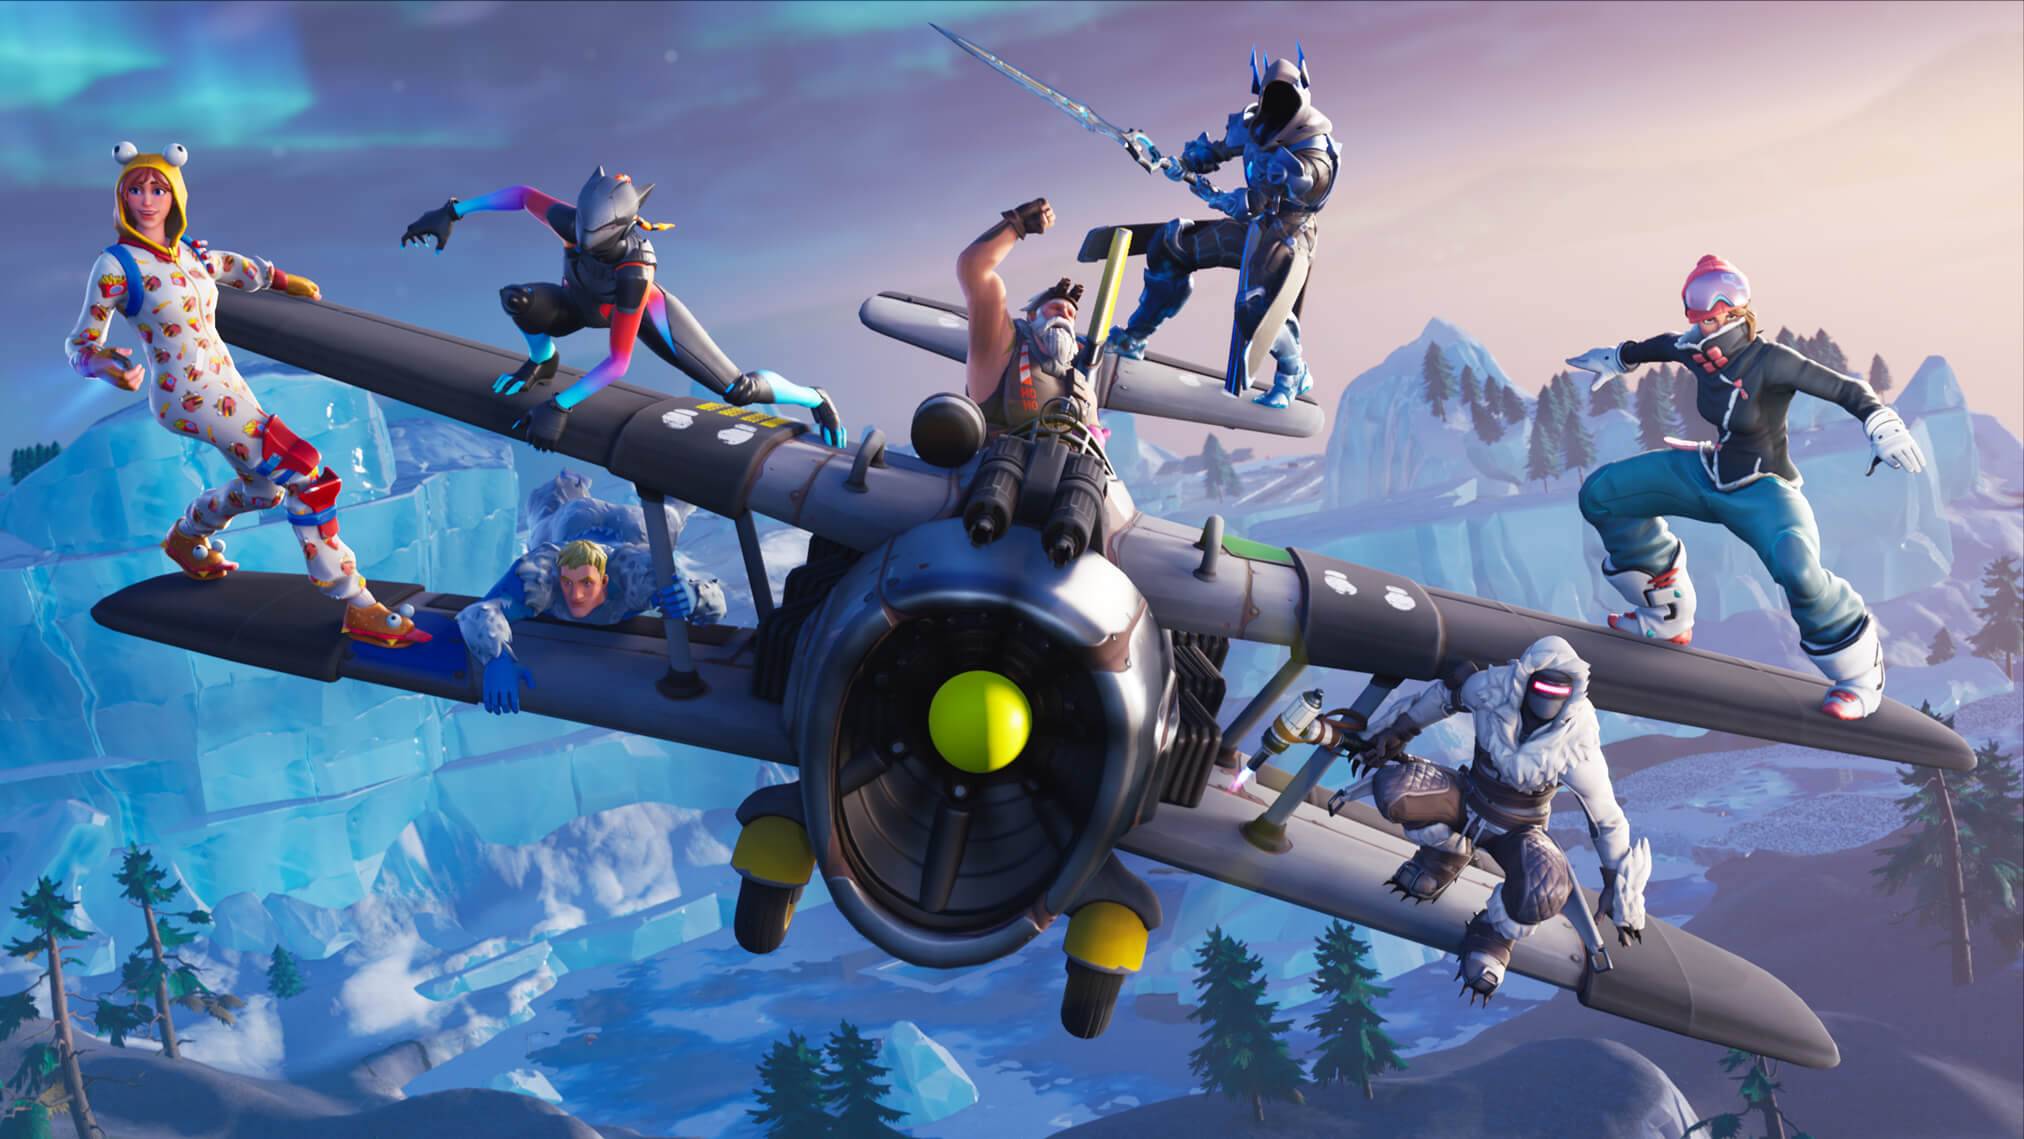 You can get Fortnite’s Battle Pass for Season 8 free!